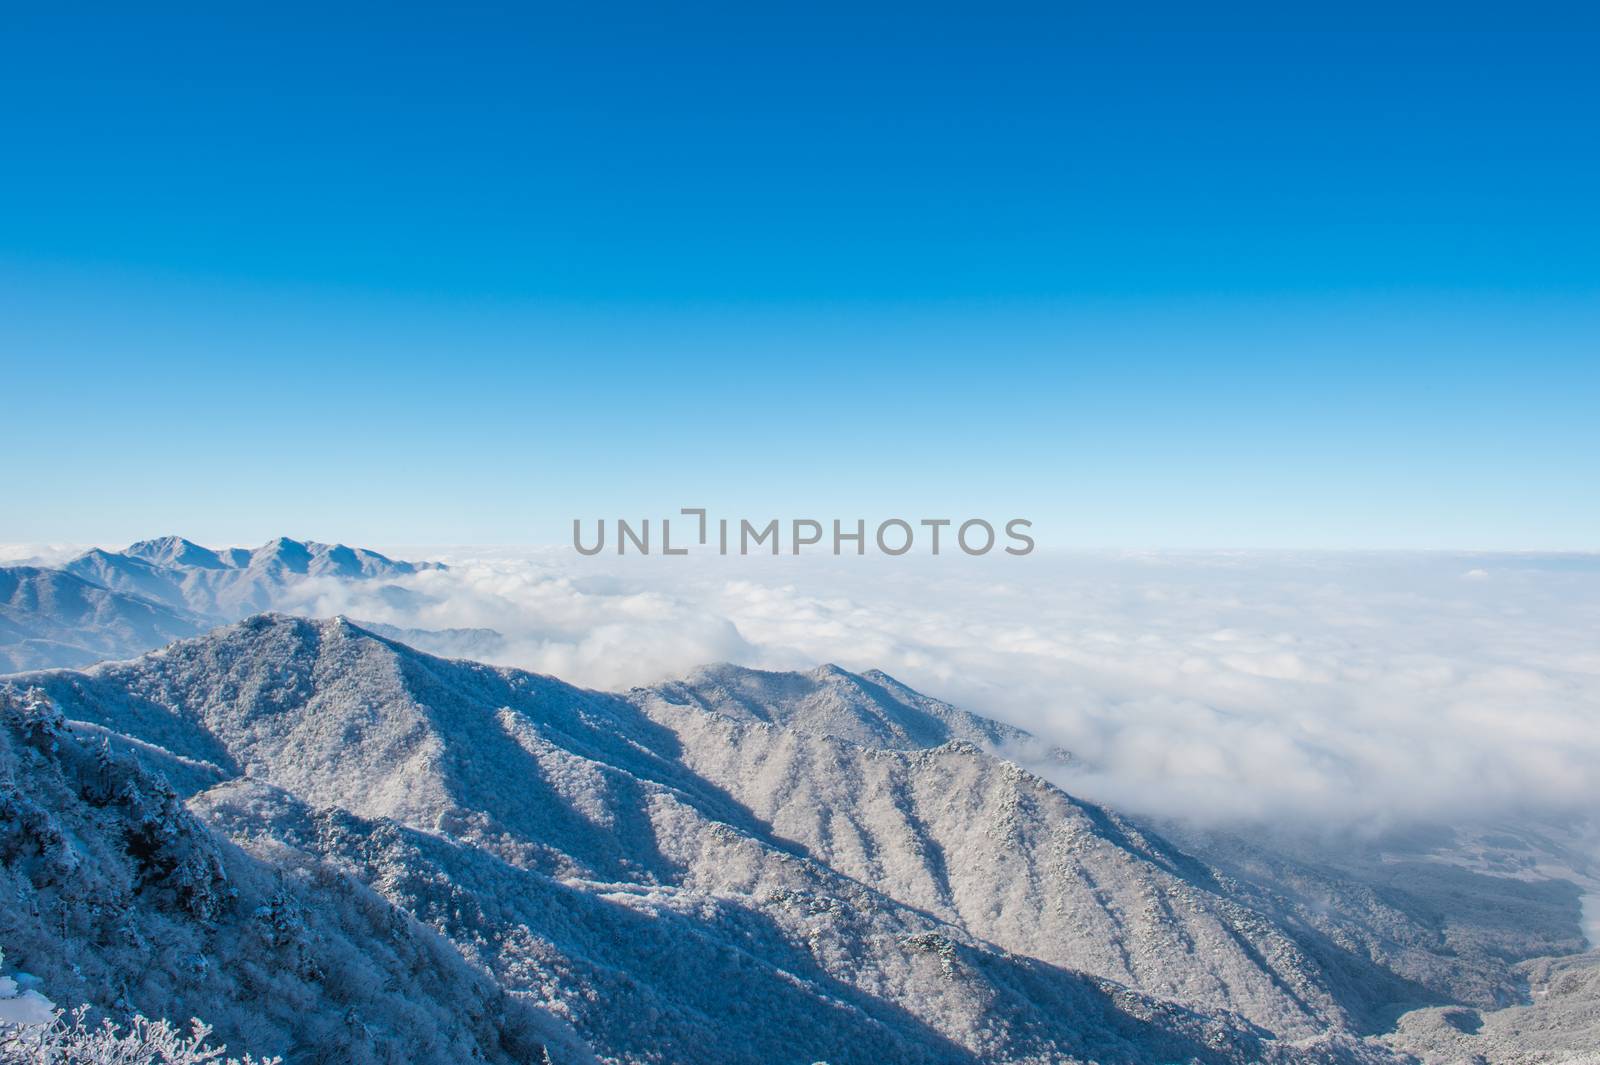 Seoraksan mountains is covered by morning fog in winter, Korea. by gutarphotoghaphy